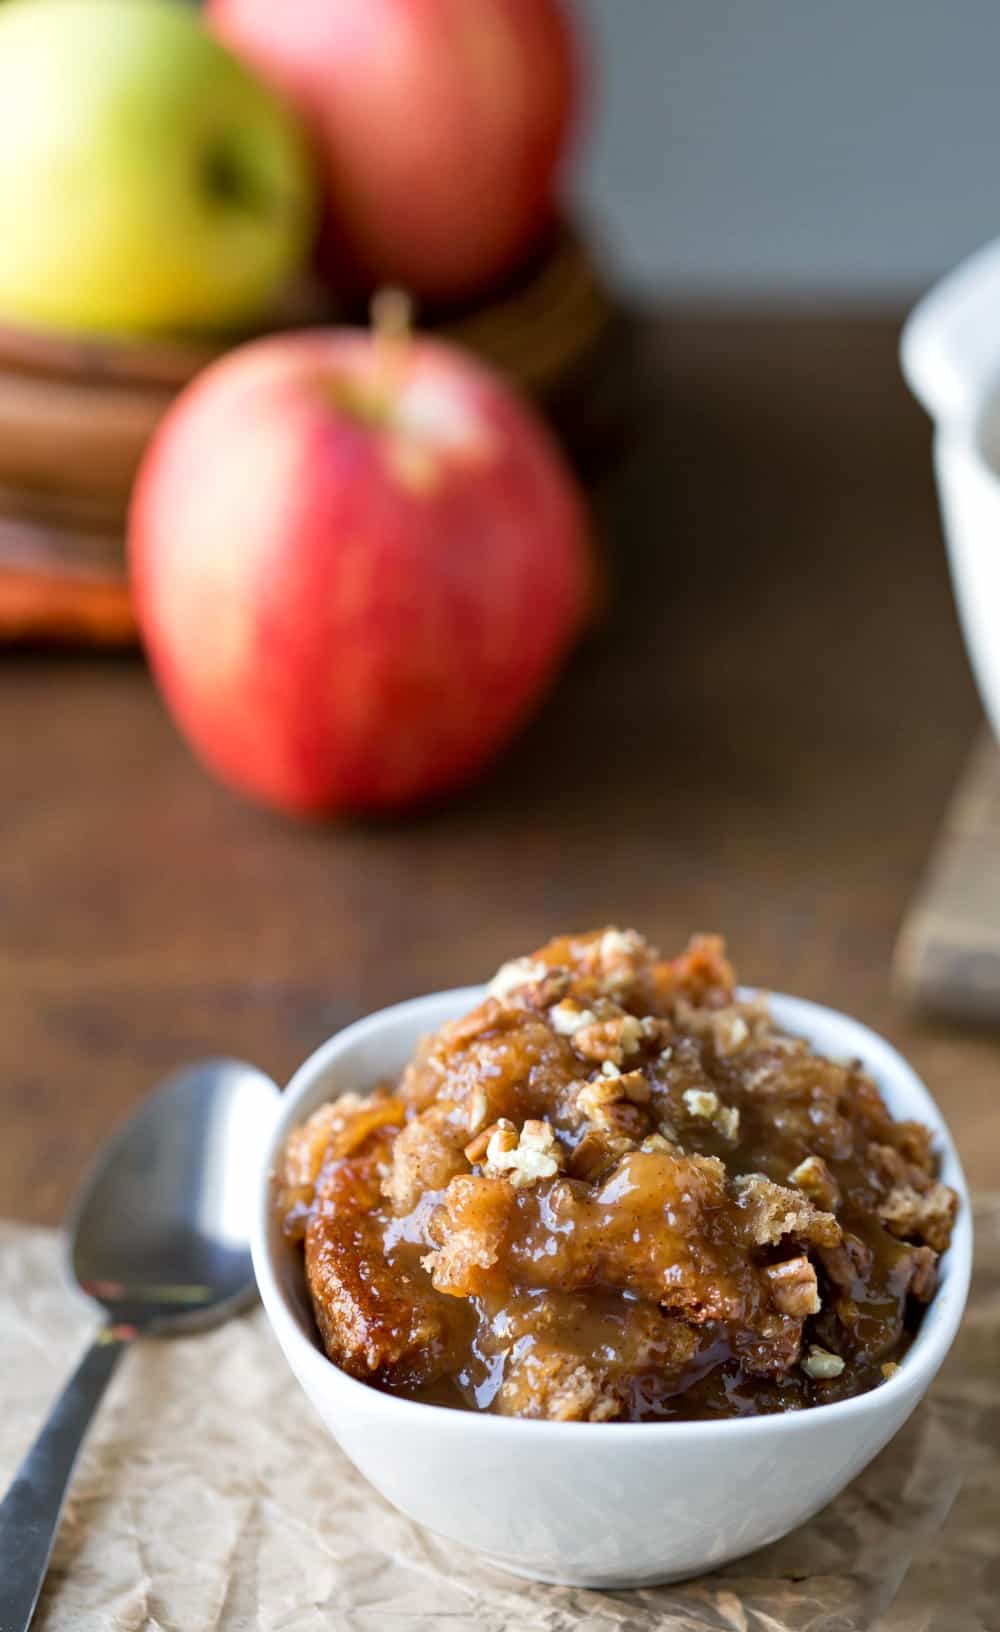 Caramel Apple Cobbler Cake Recipe next to apples and a silver spoon